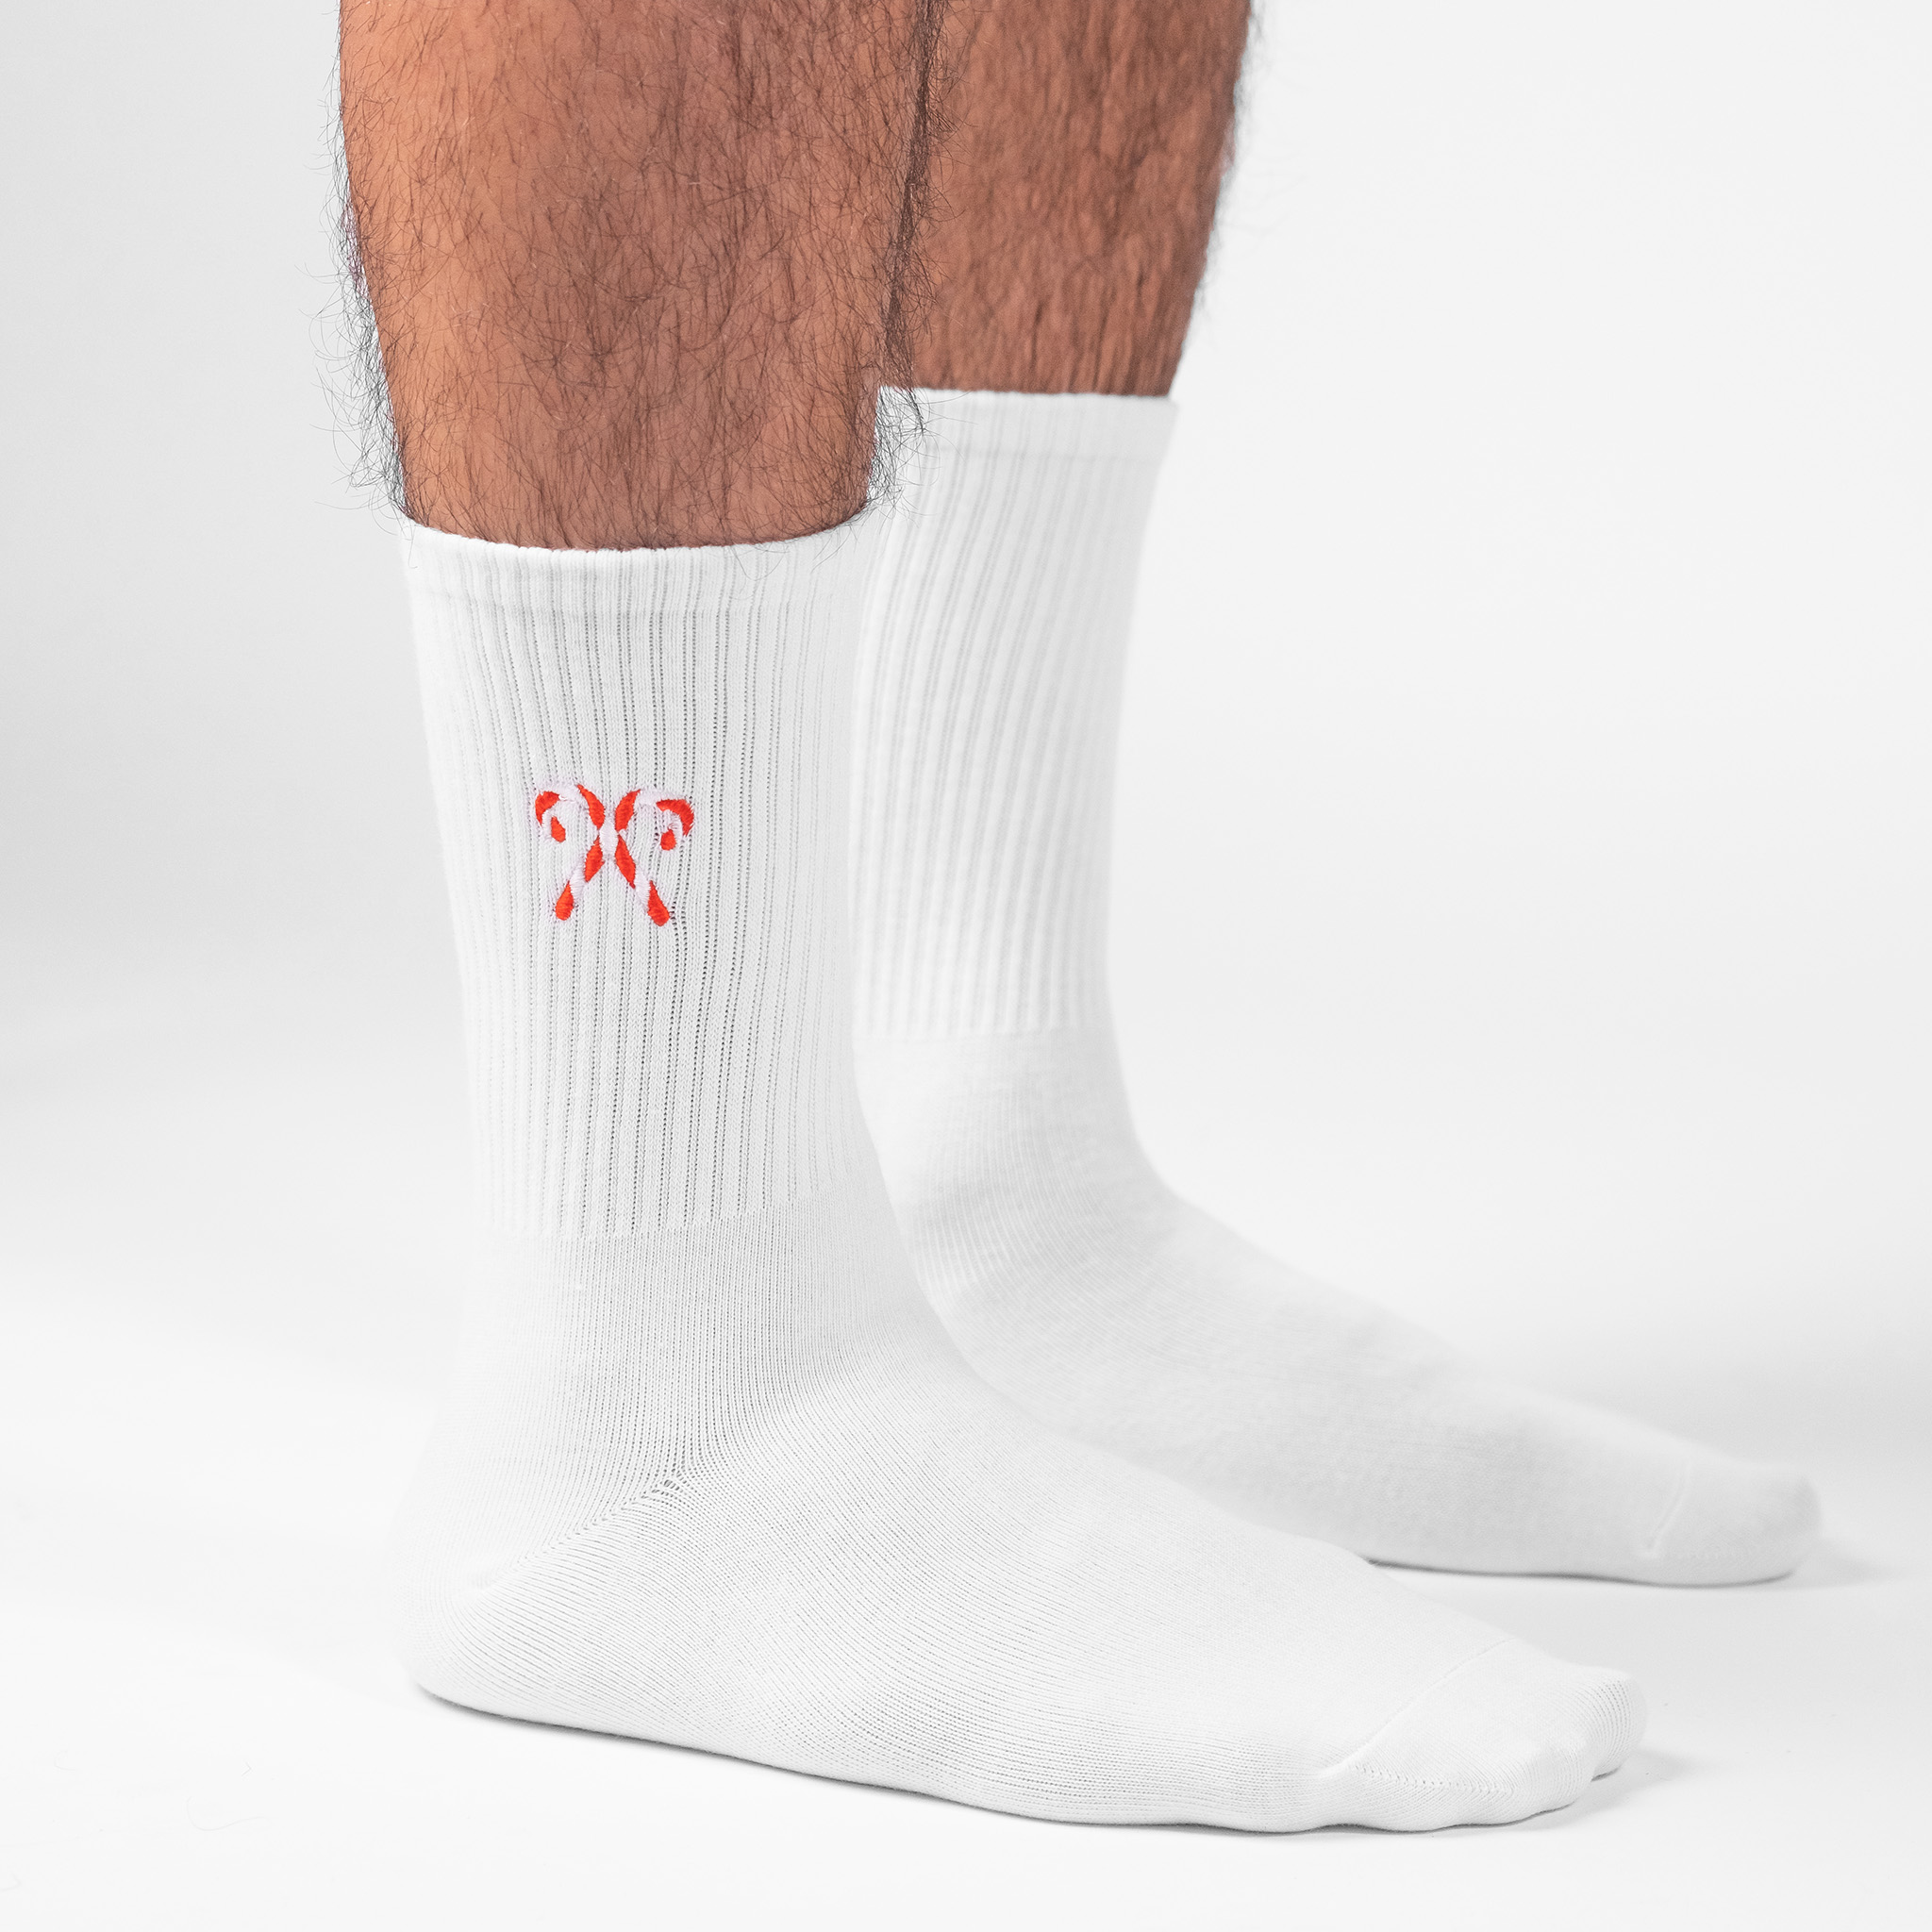 A male model wearing a pair of personalised white crew socks with the a candy cane embroidered onto each sock.